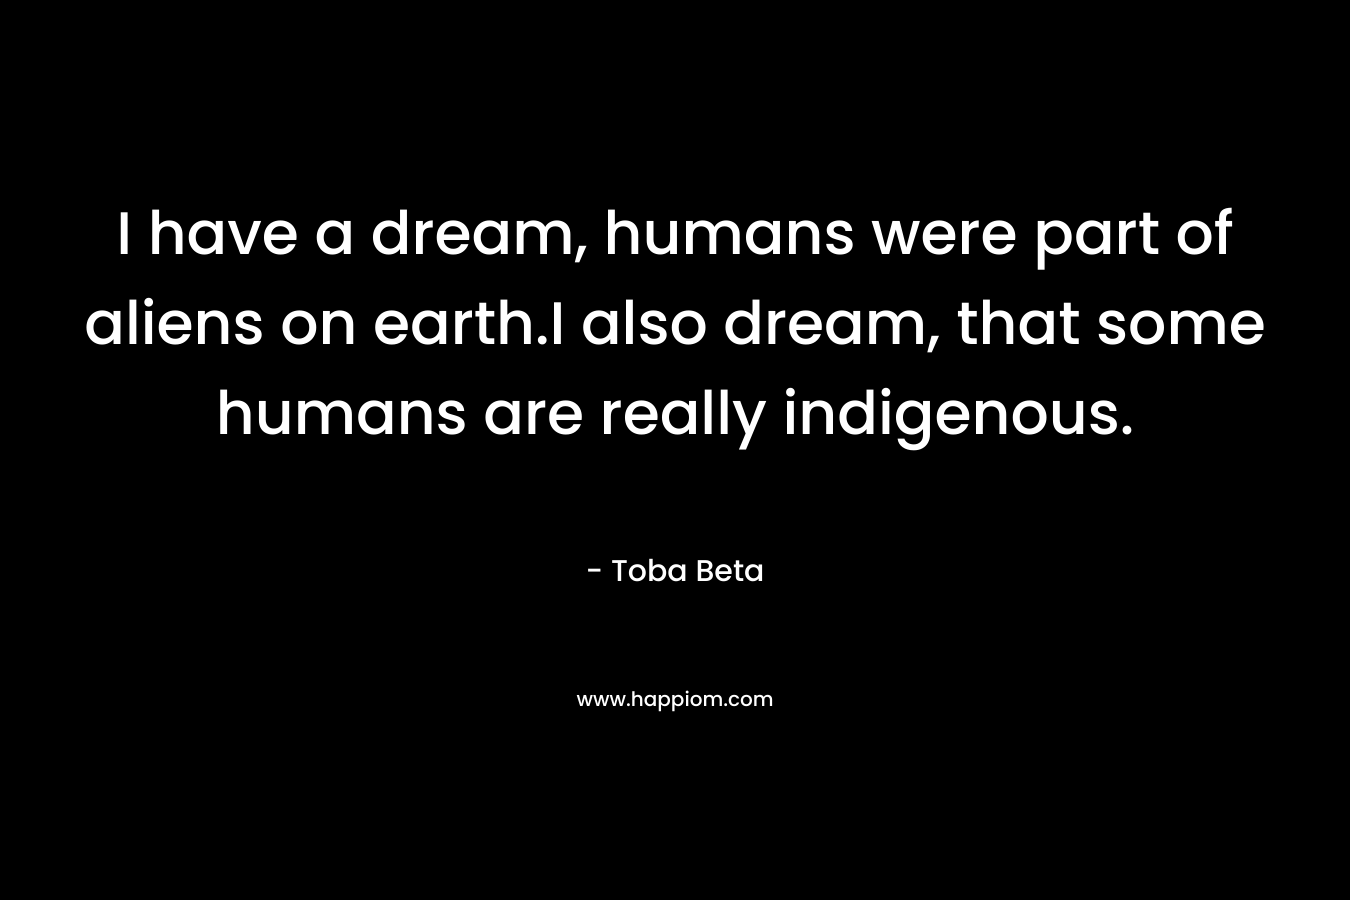 I have a dream, humans were part of aliens on earth.I also dream, that some humans are really indigenous. – Toba Beta